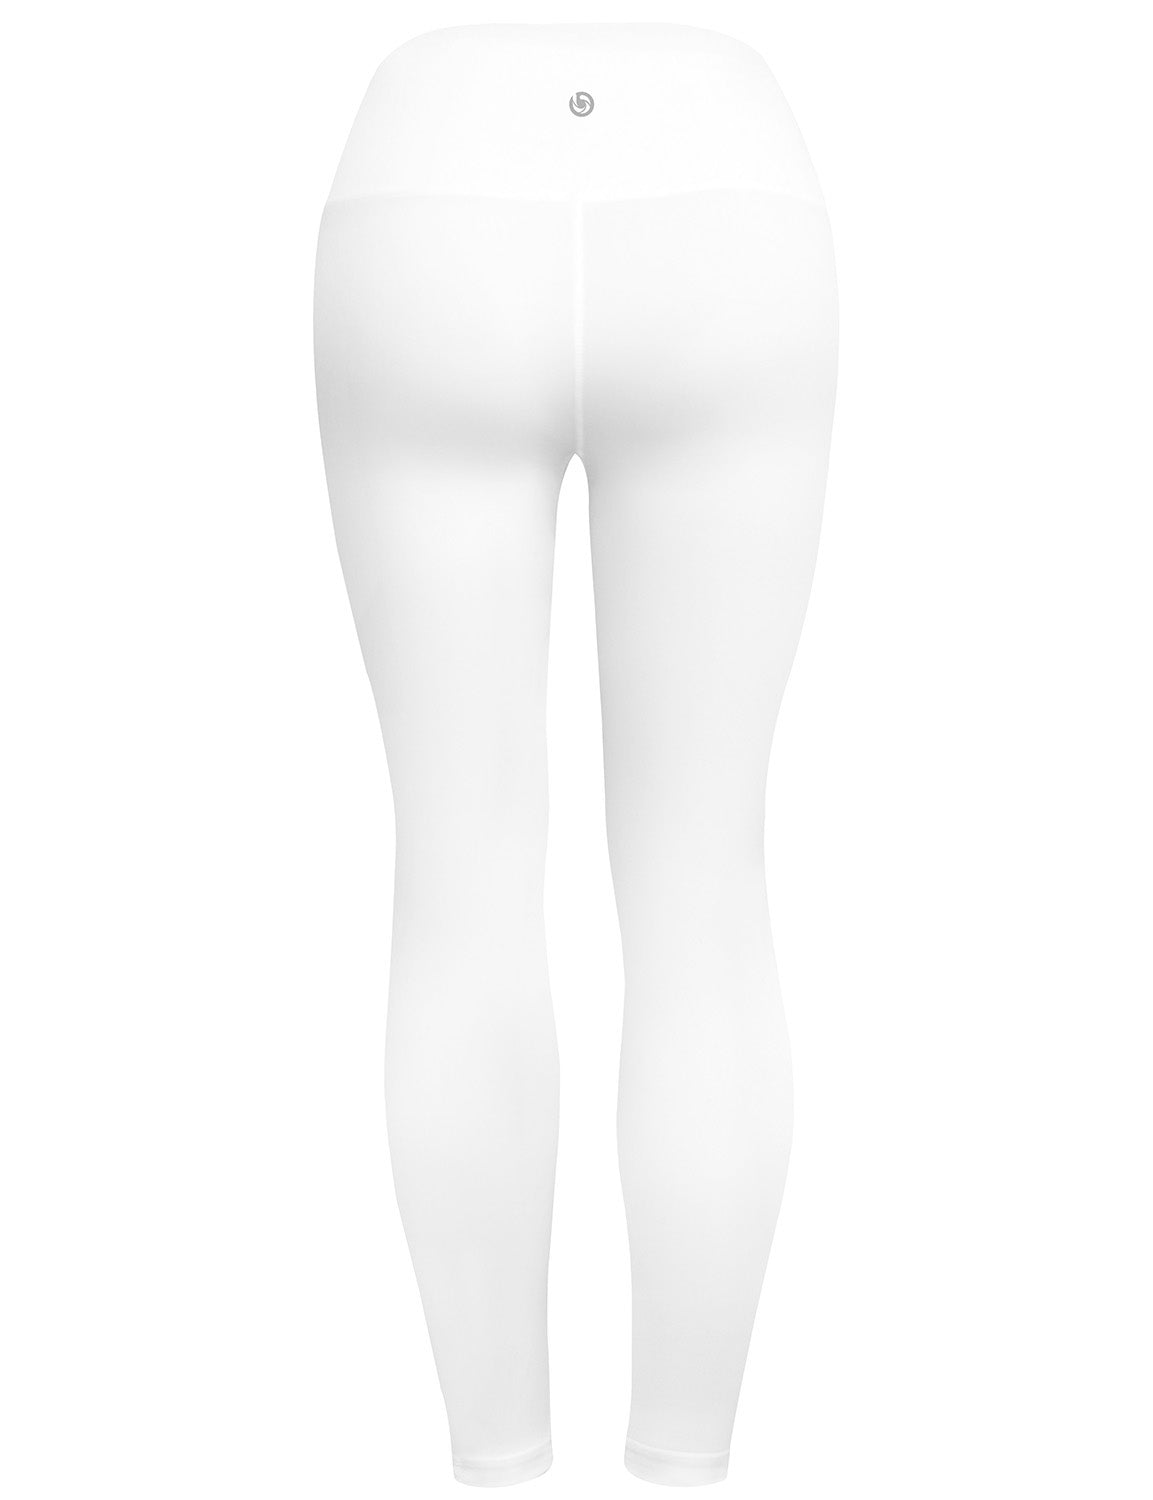 High Waist Pilates Pants white 75%Nylon/25%Spandex Fabric doesn't attract lint easily 4-way stretch No see-through Moisture-wicking Tummy control Inner pocket Four lengths